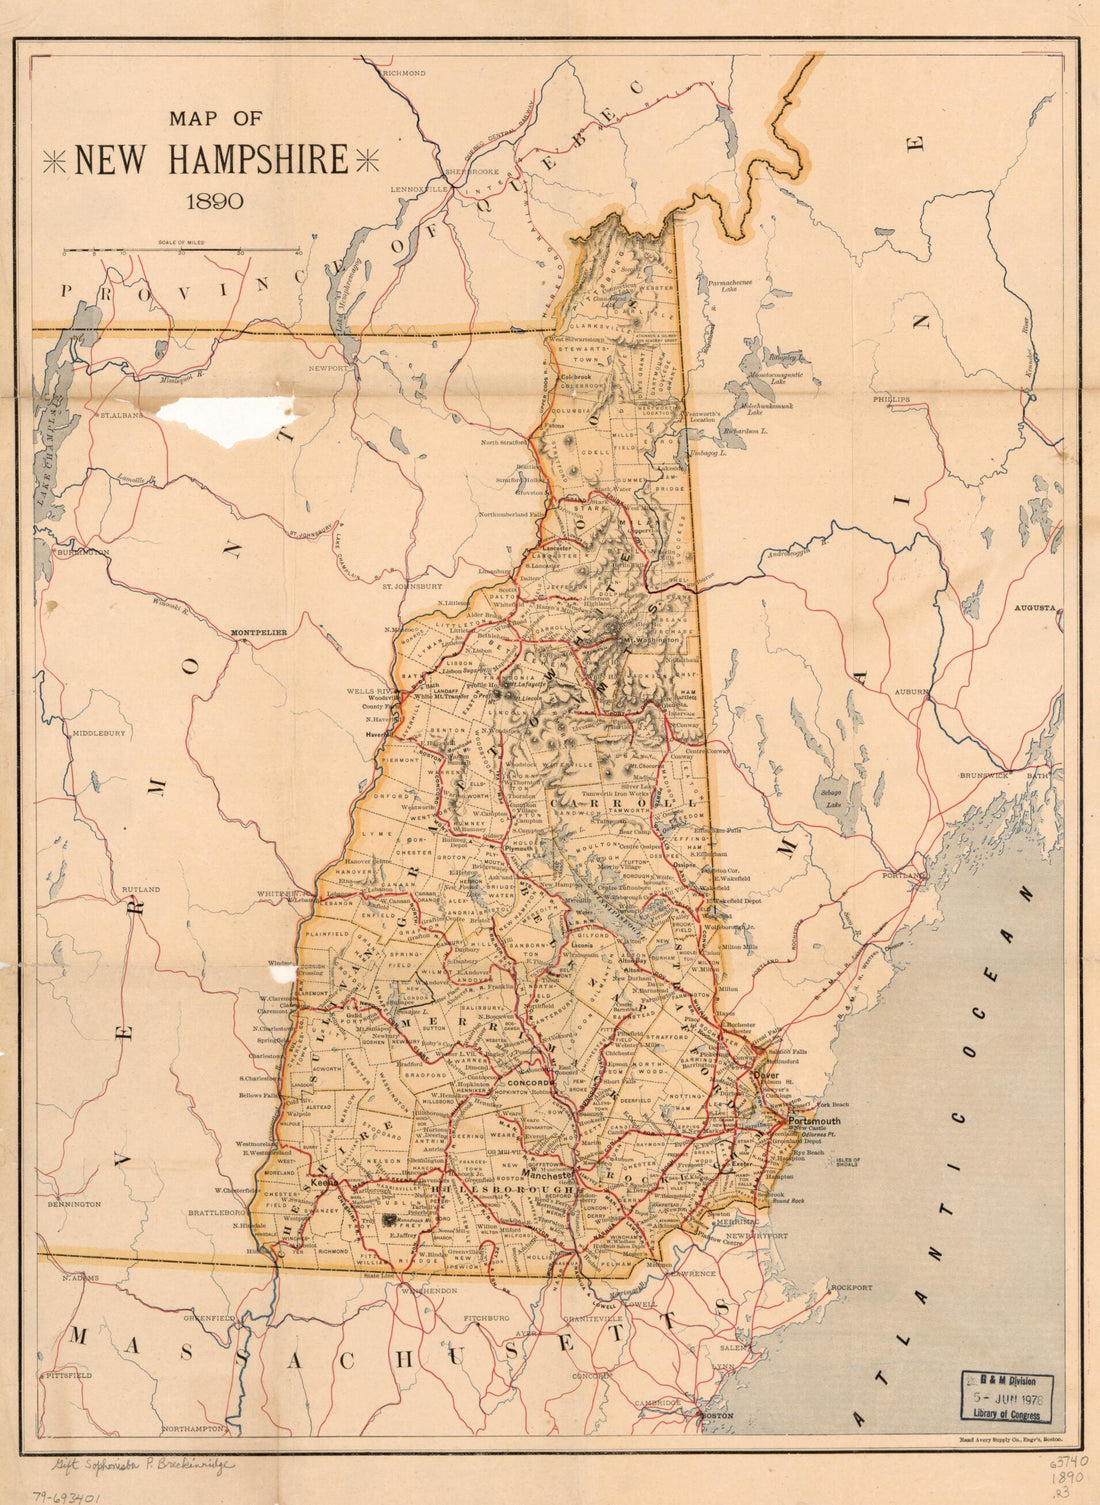 This old map of Map of New Hampshire, from 1890 was created by  Rand Avery Supply Co in 1890